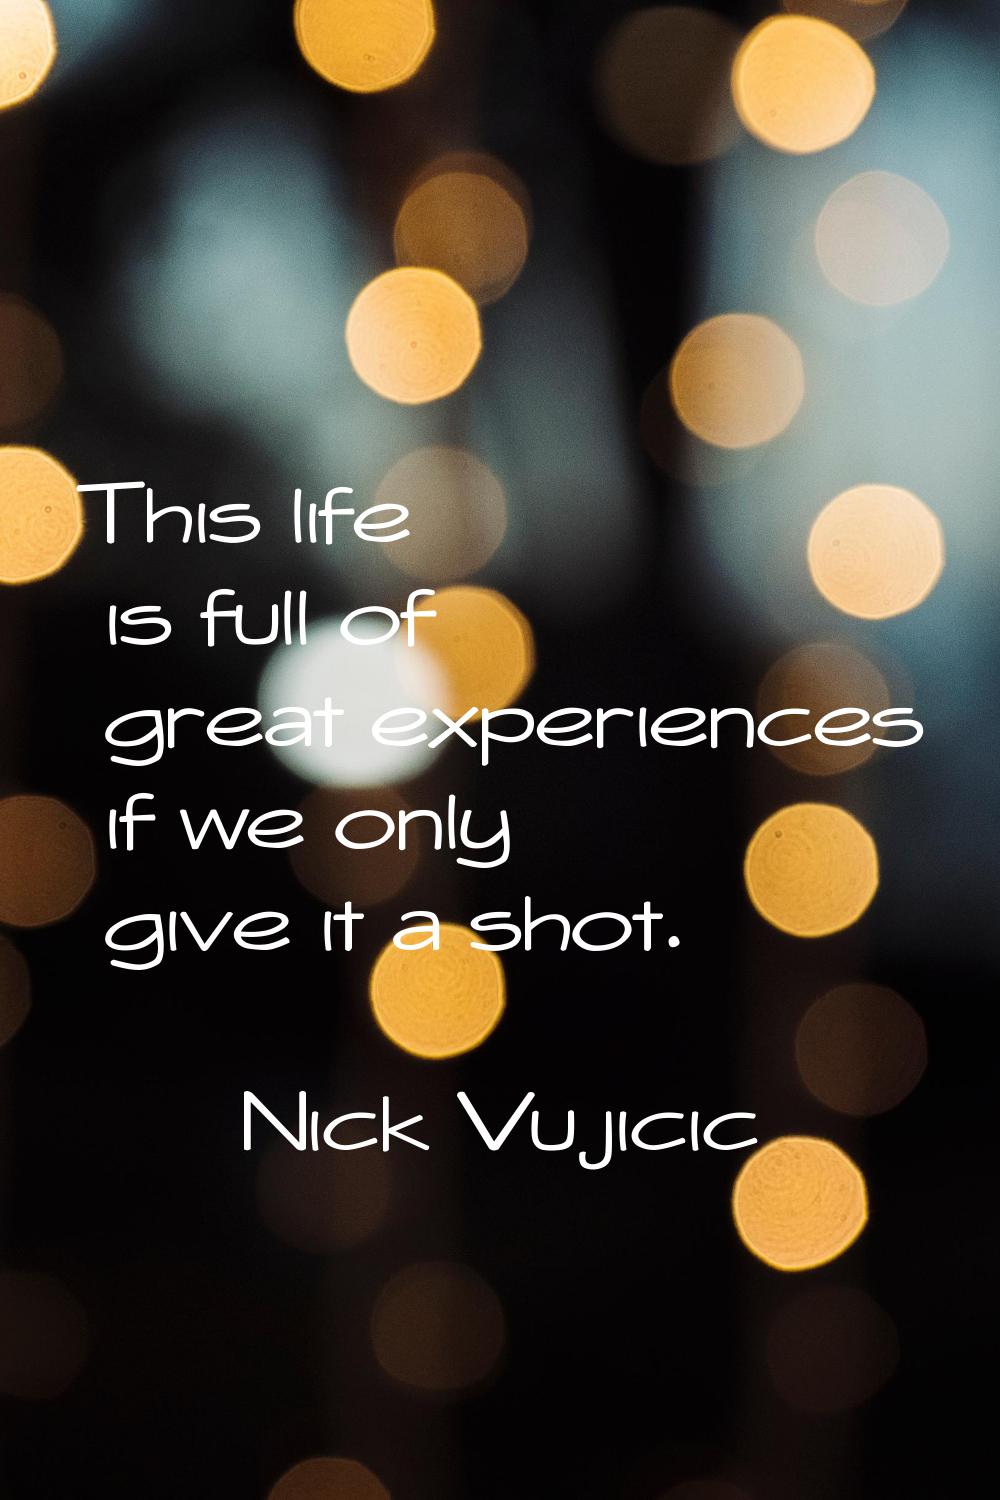 This life is full of great experiences if we only give it a shot.